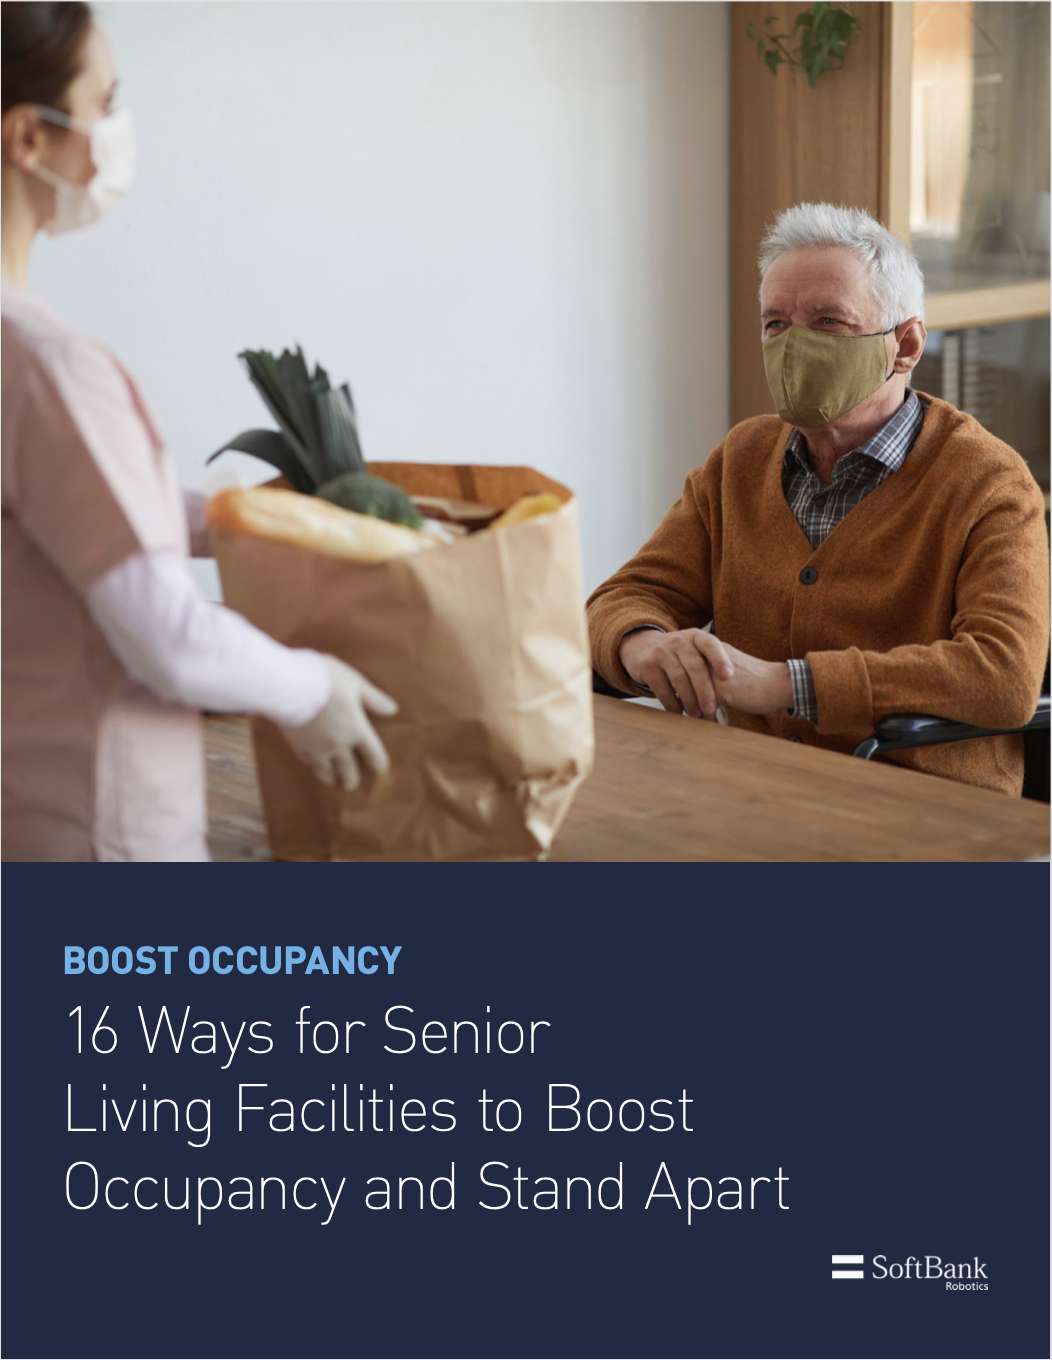 16 Ways for Senior Living Facilities to Boost Occupancy and Stand Apart